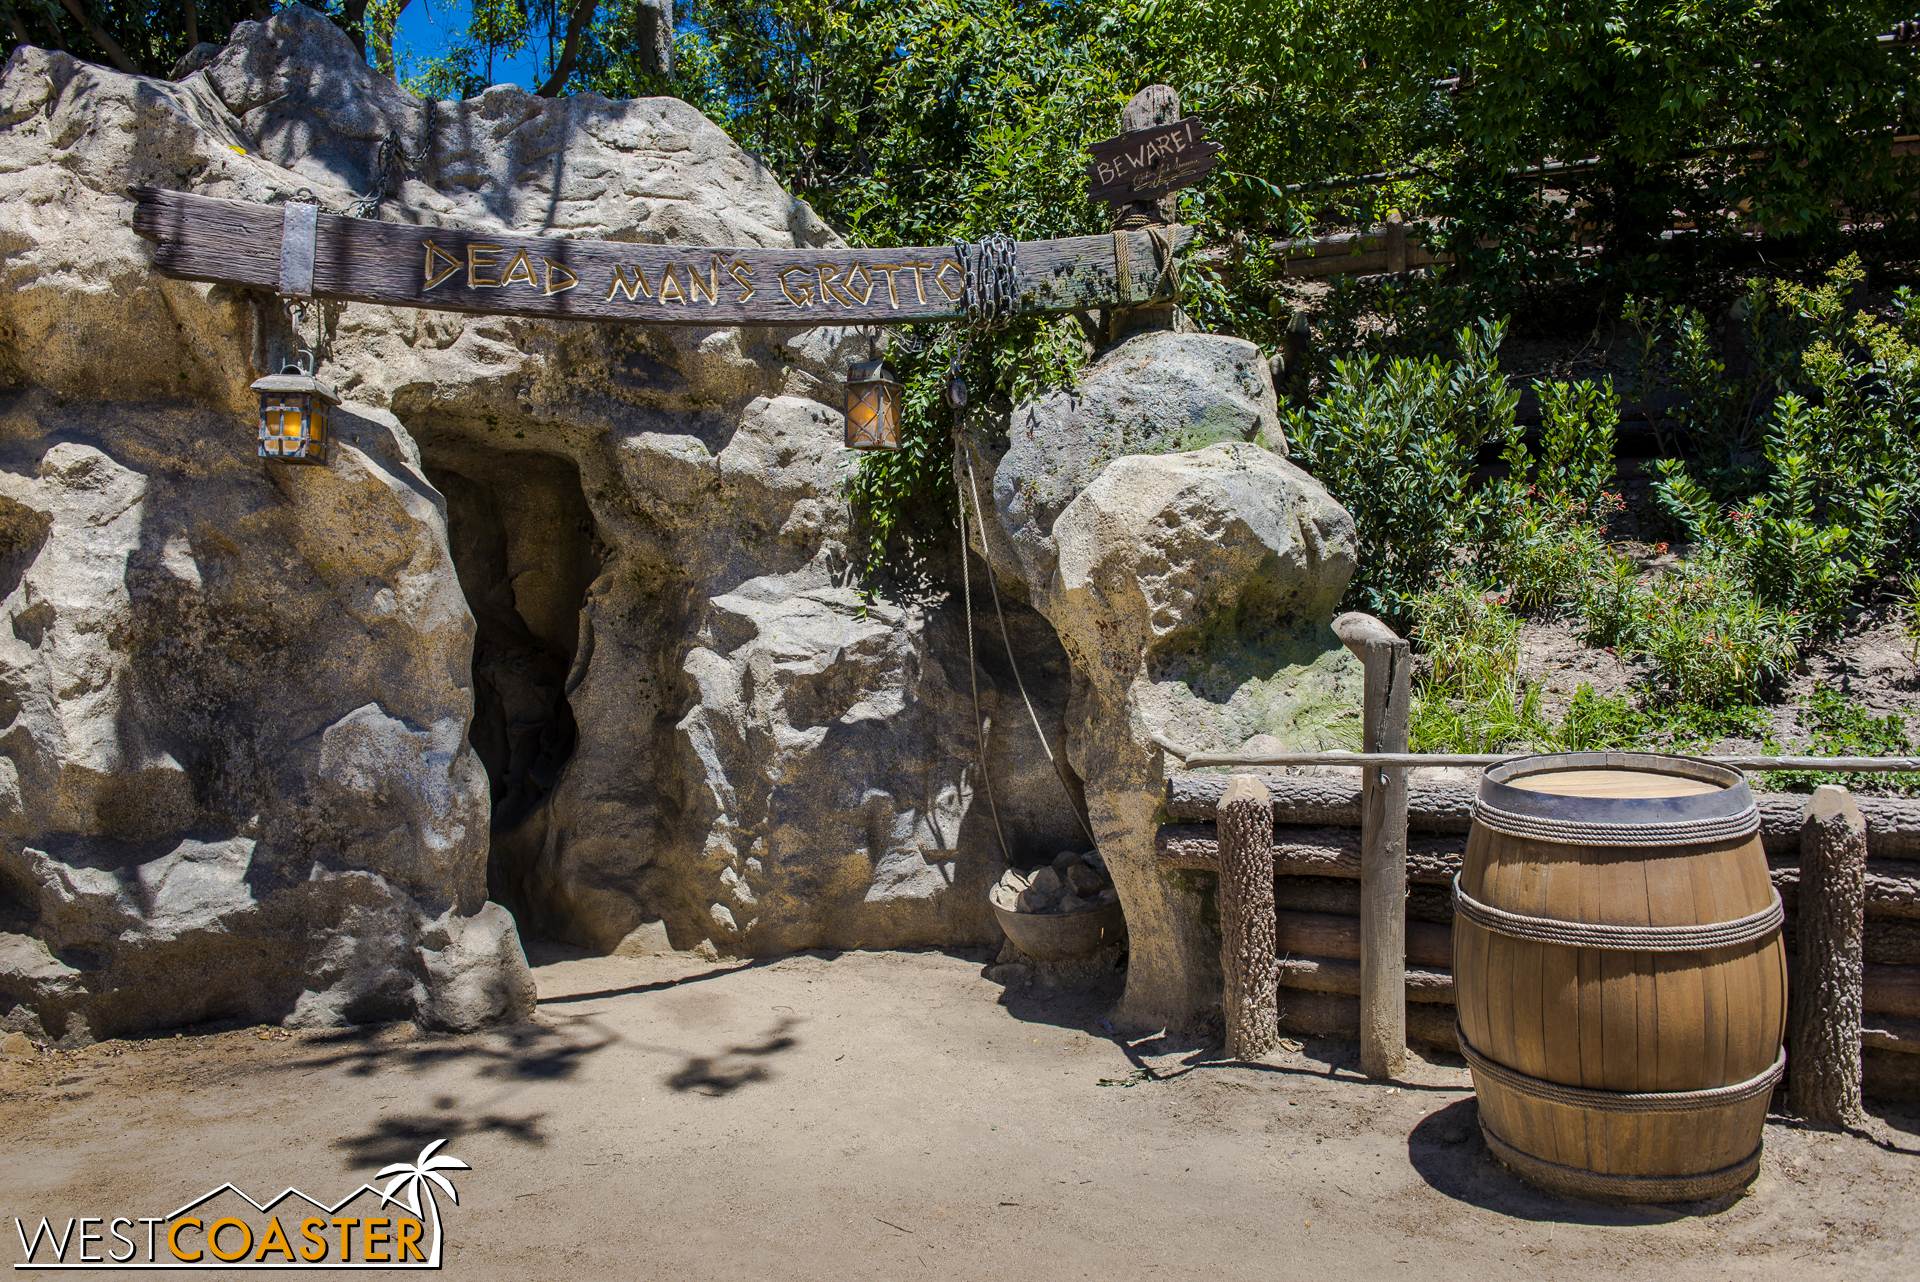  Theatrical elements are particularly strong in Dead Man's Grotto. 